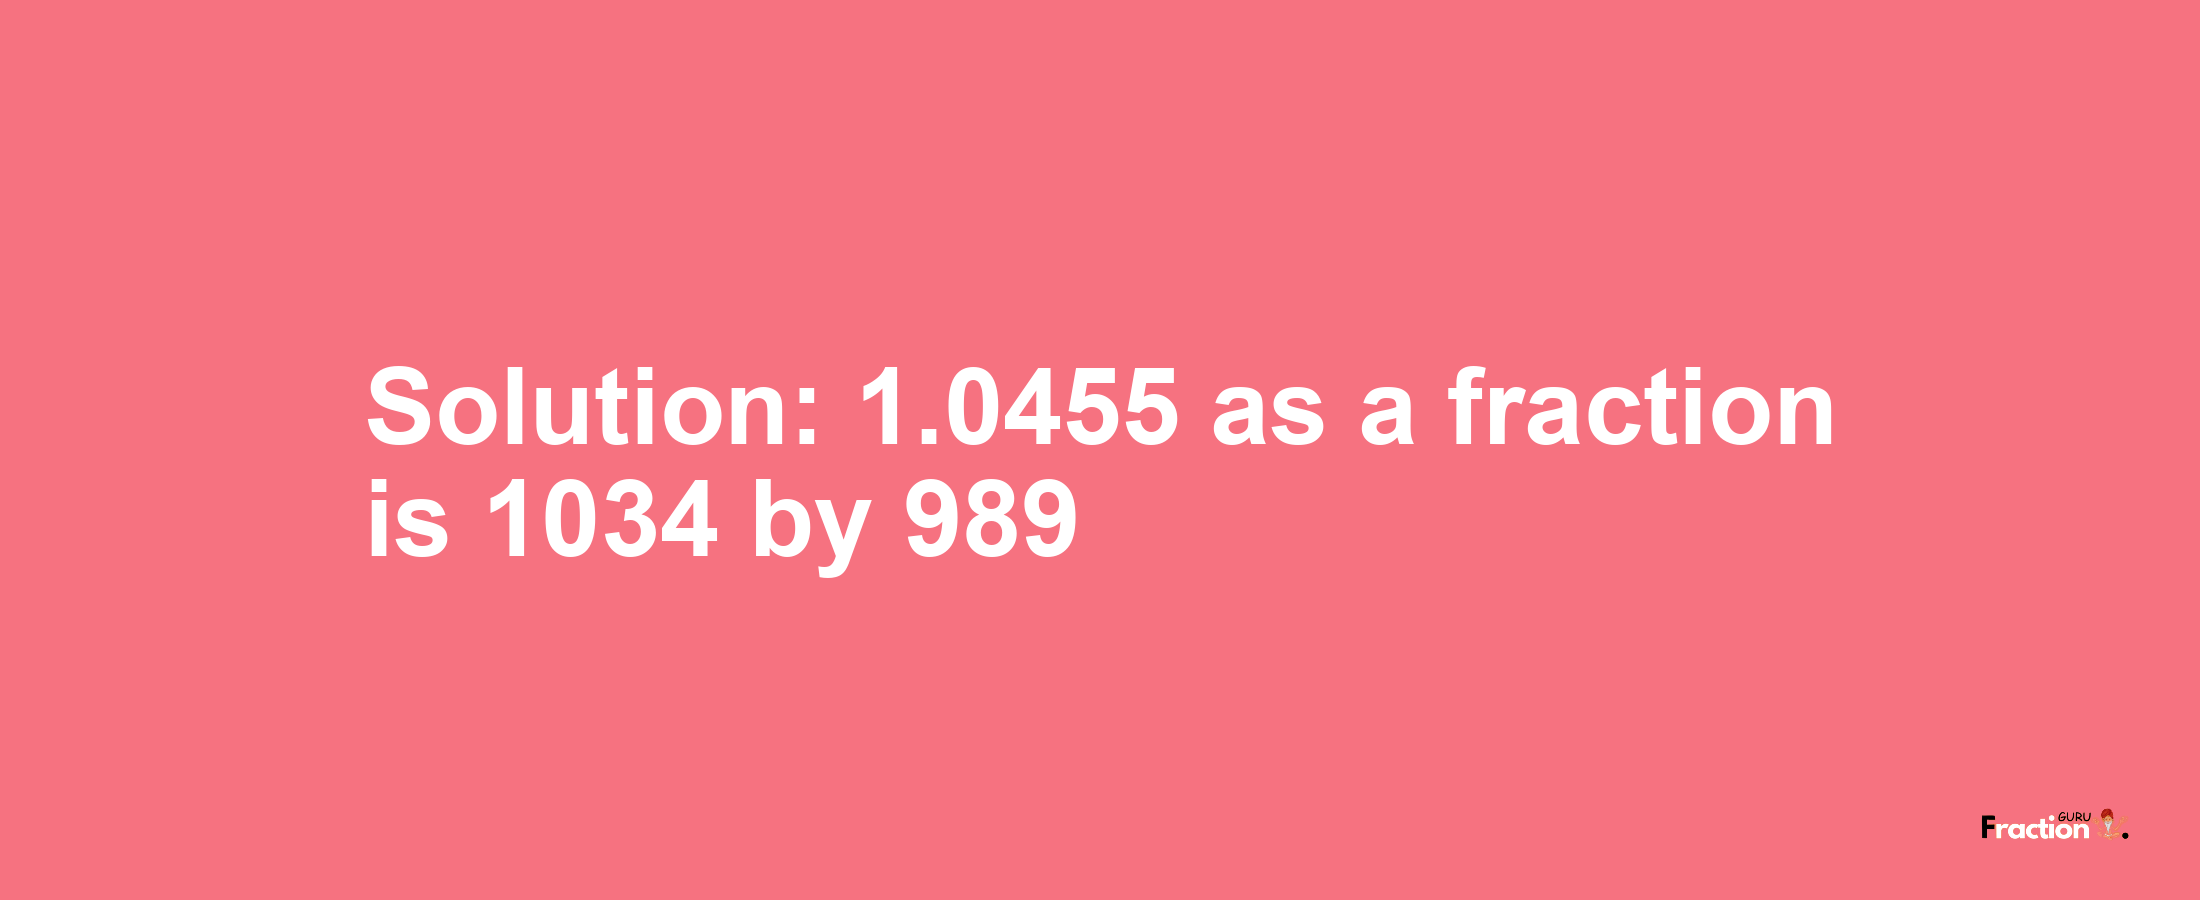 Solution:1.0455 as a fraction is 1034/989